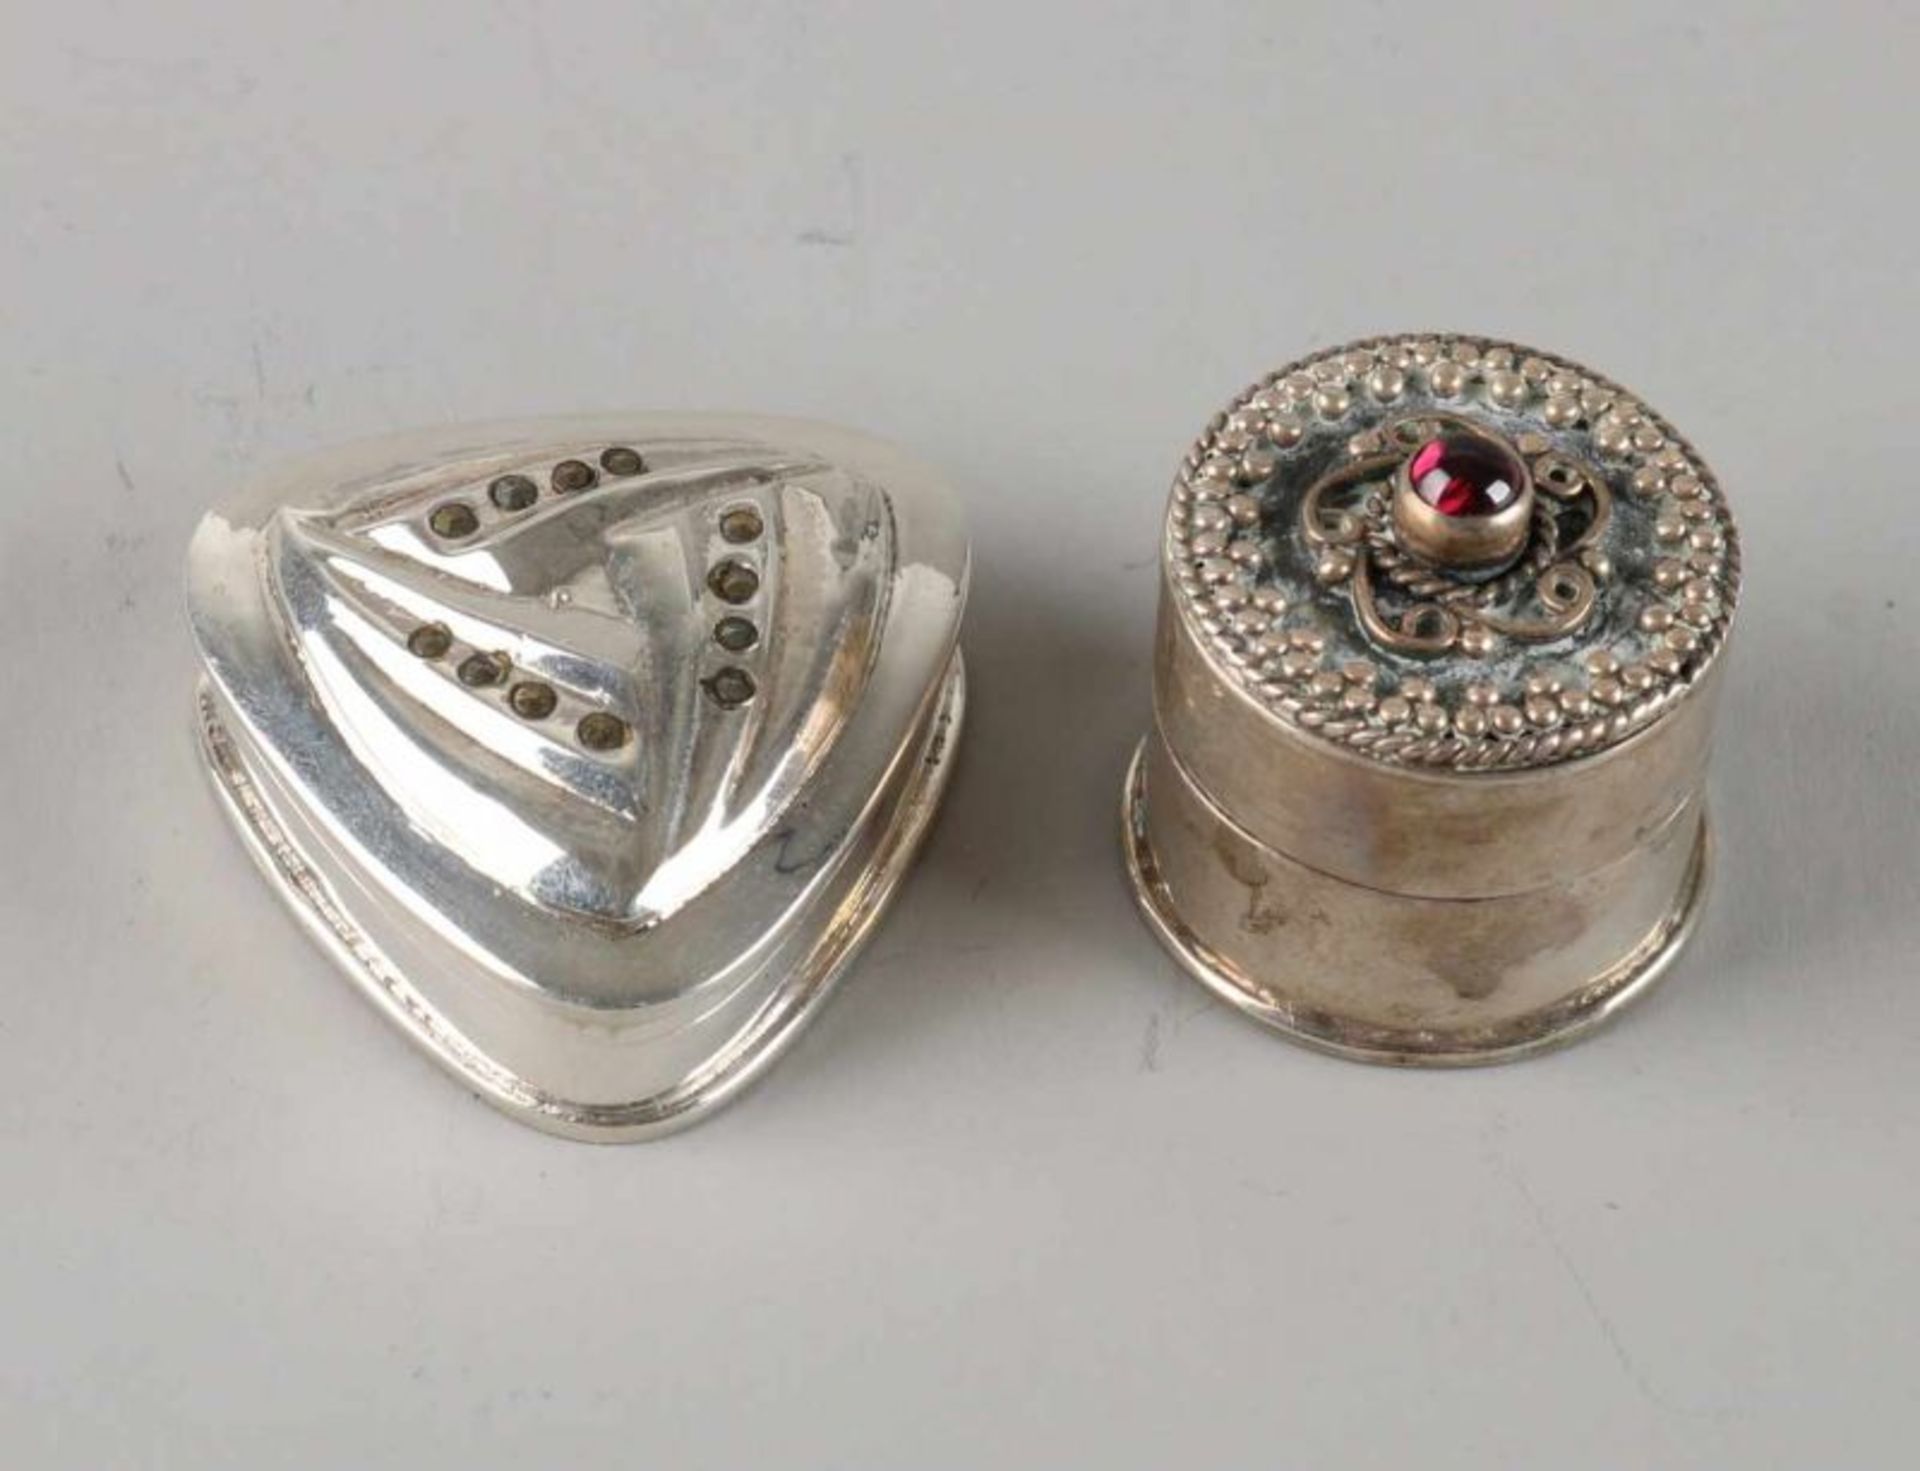 Two silver pillboxes, 925/000, a round box, decorated with filigree and a red stone, ø2,5x2,5cm